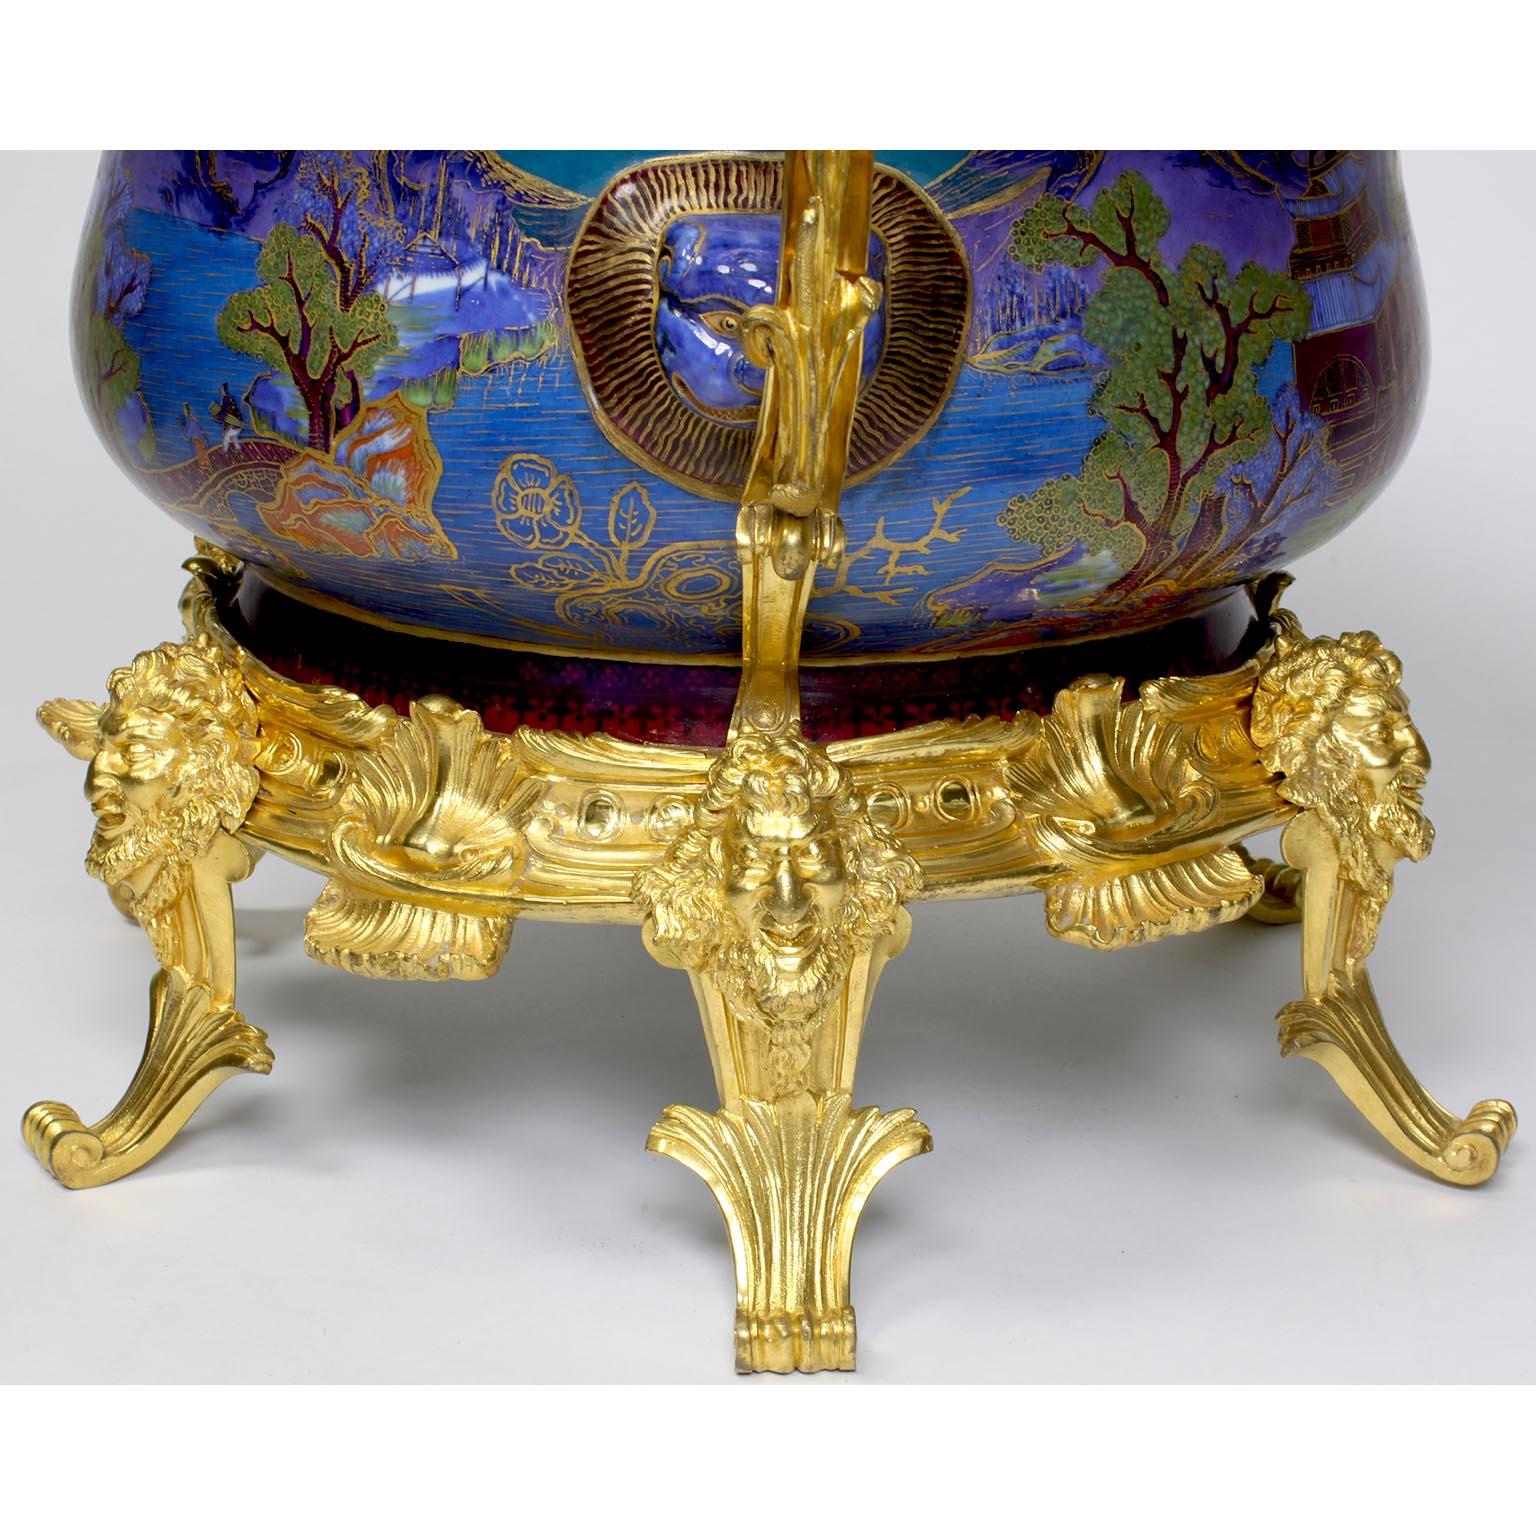 Chinese Export Famille Verte Porcelain & French Ormolu Chinoiserie Centerpiece For Sale 8